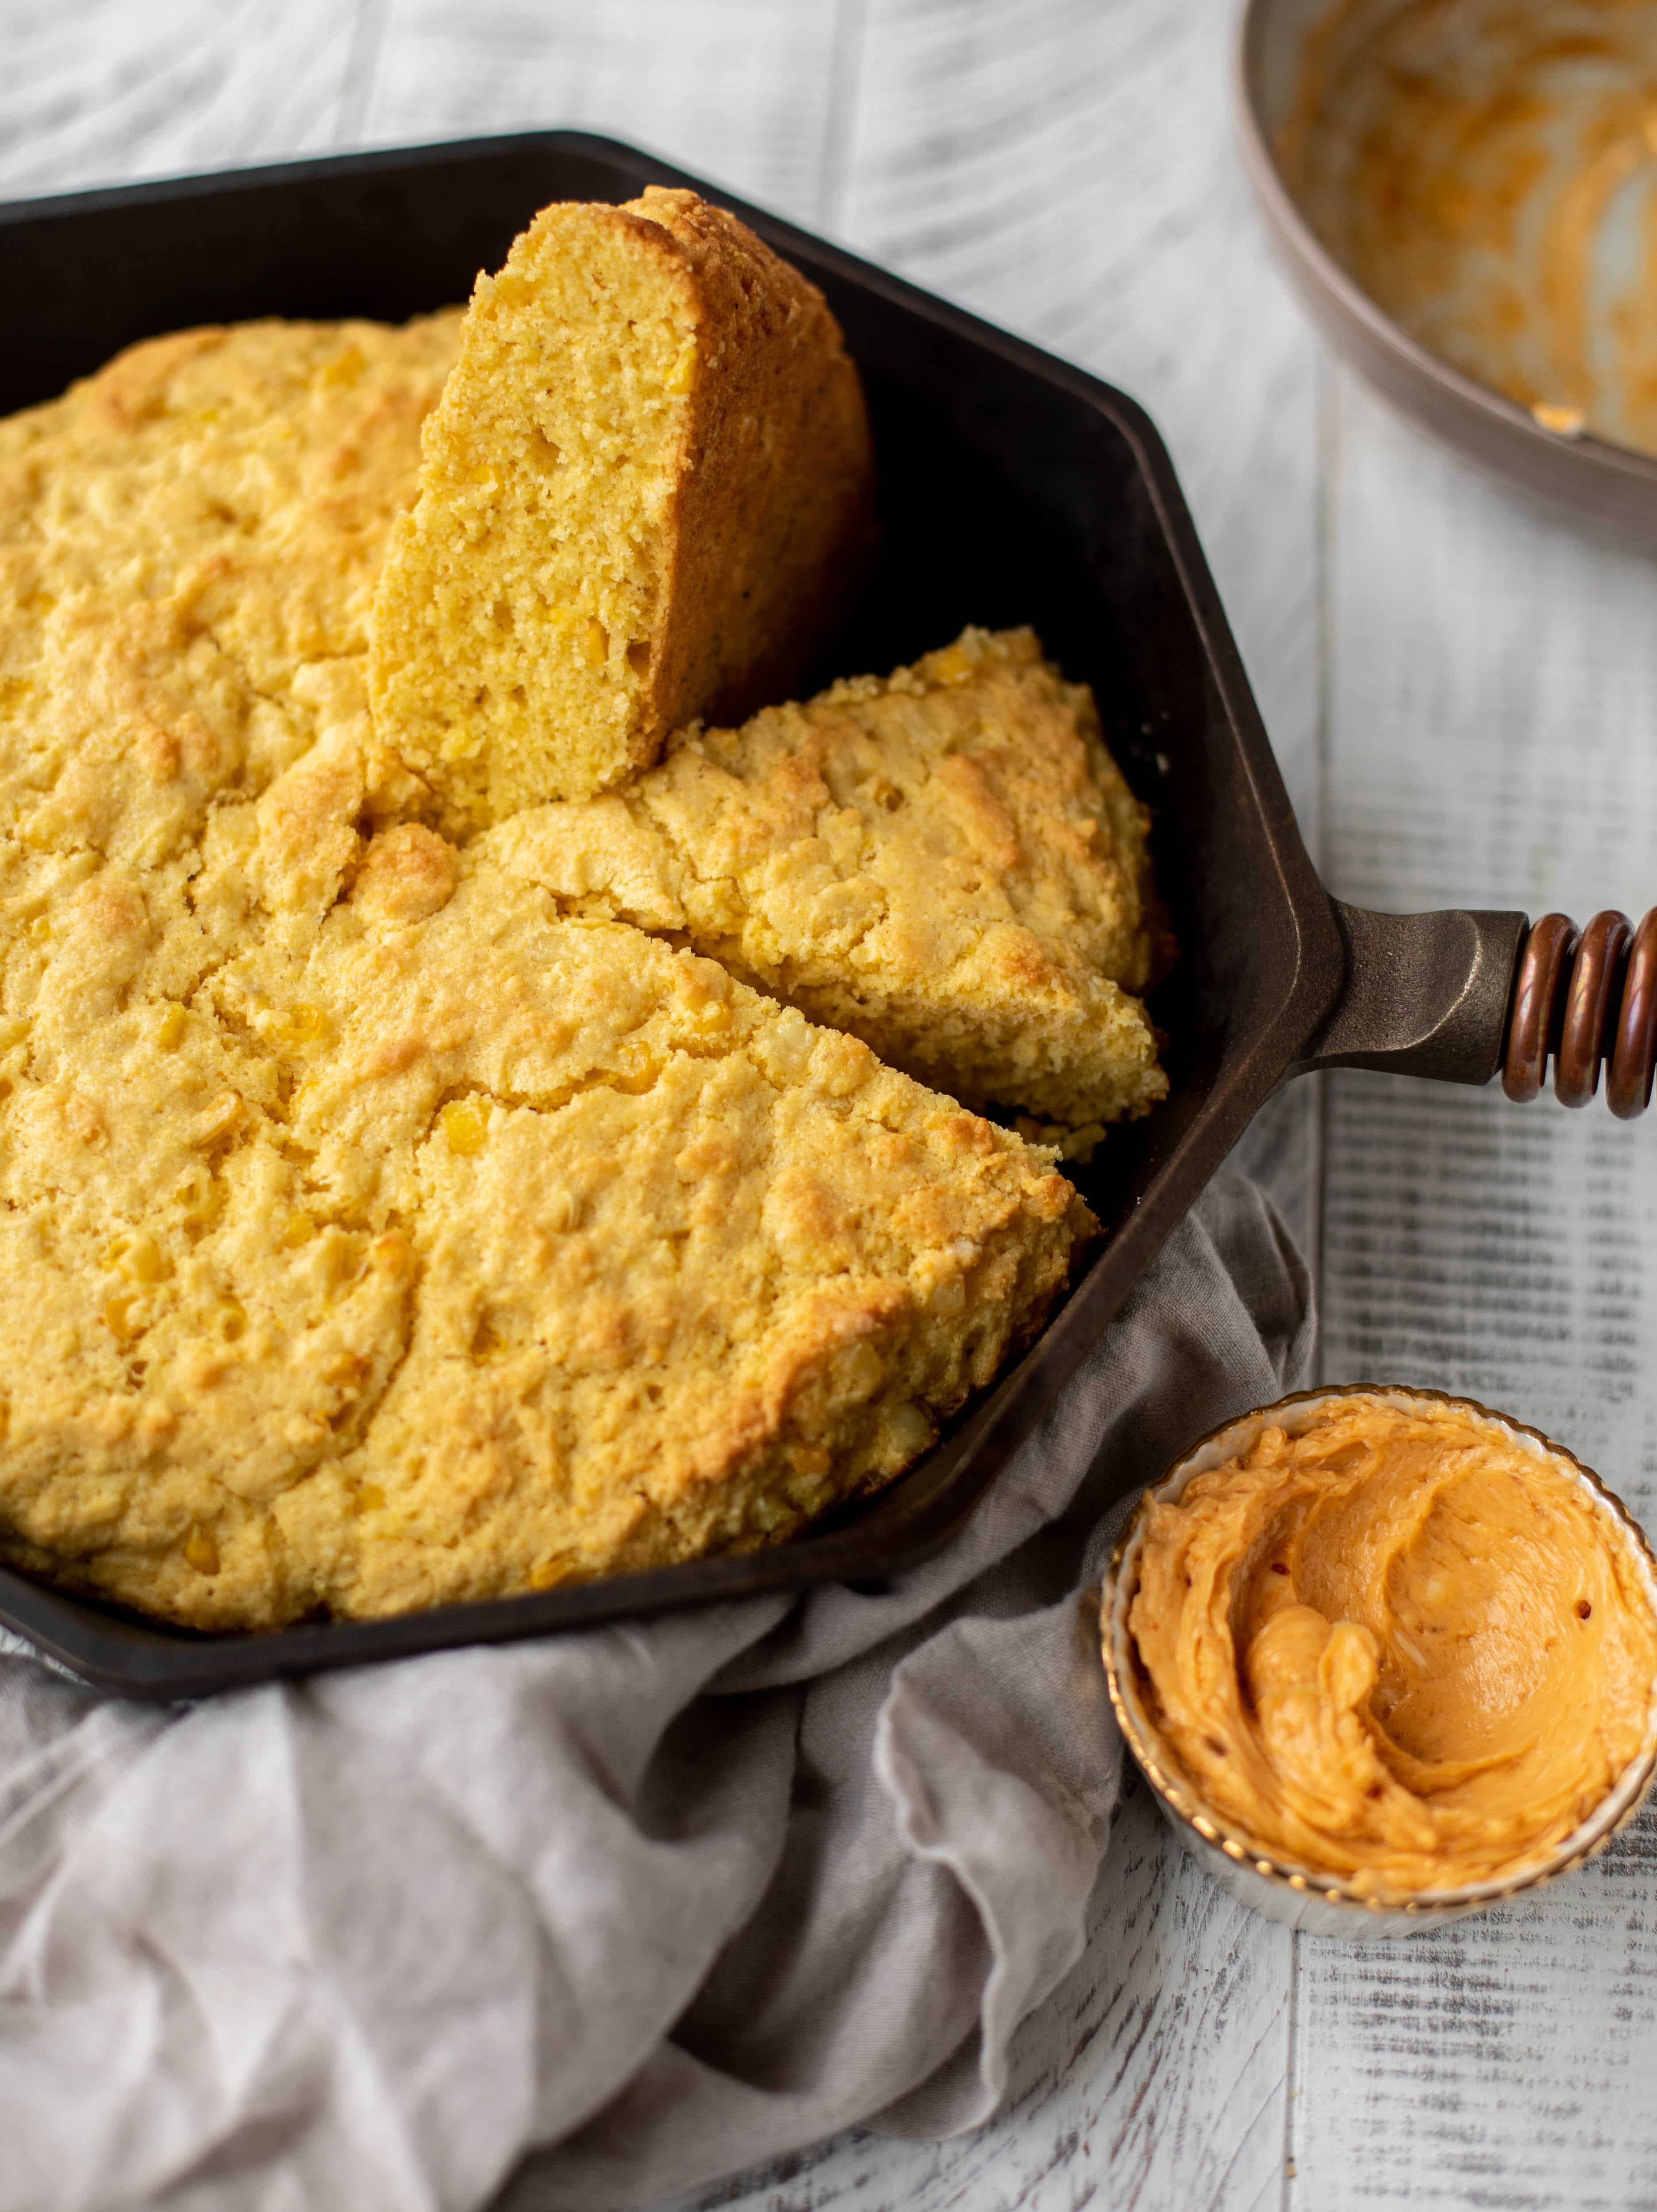 This skillet cornbread is so fluffy and delicious! Serve it hot from the oven with chipotle honey butter. It makes a great appetizer or side dish. 